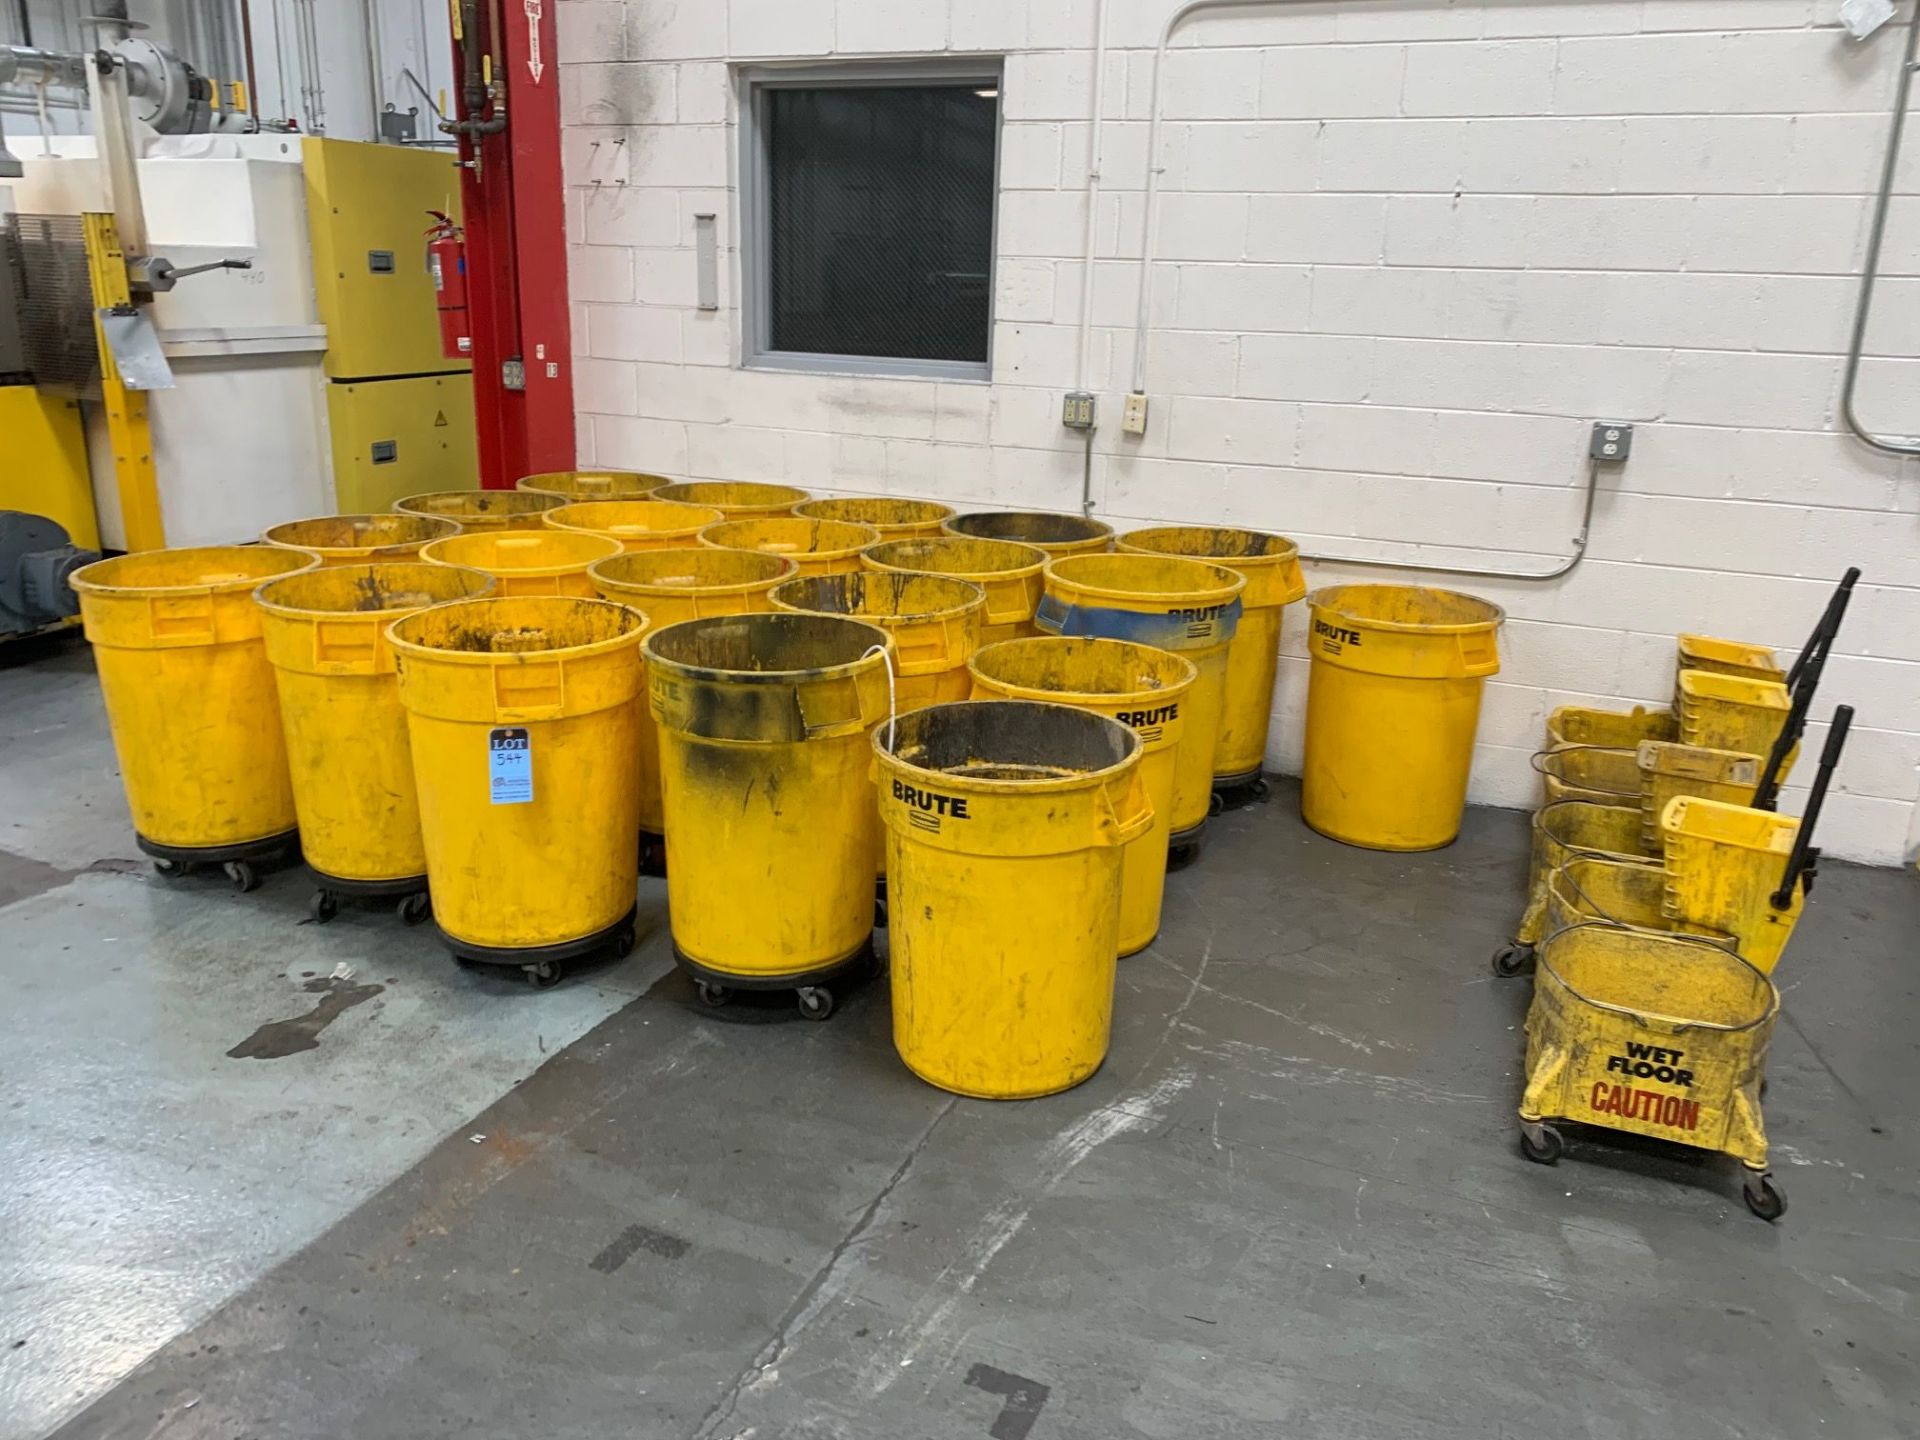 RUBBERMAID BRUTE YELLOW TRASH CONTAINERS W/ MOB BUCKET